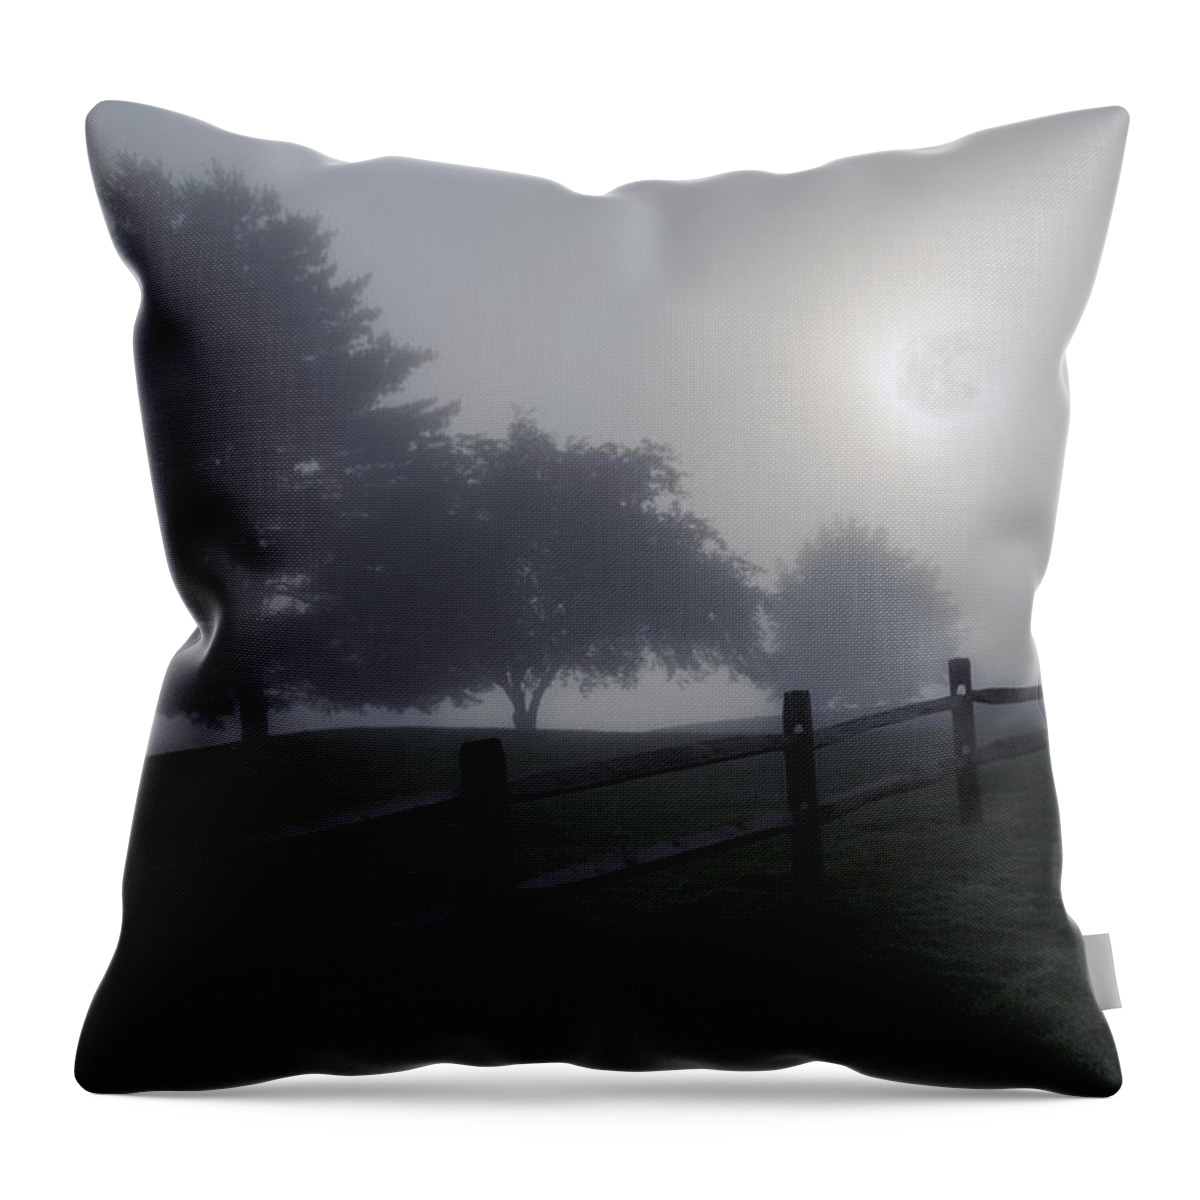 Fog Throw Pillow featuring the photograph Midnight Fog by Bill Wakeley